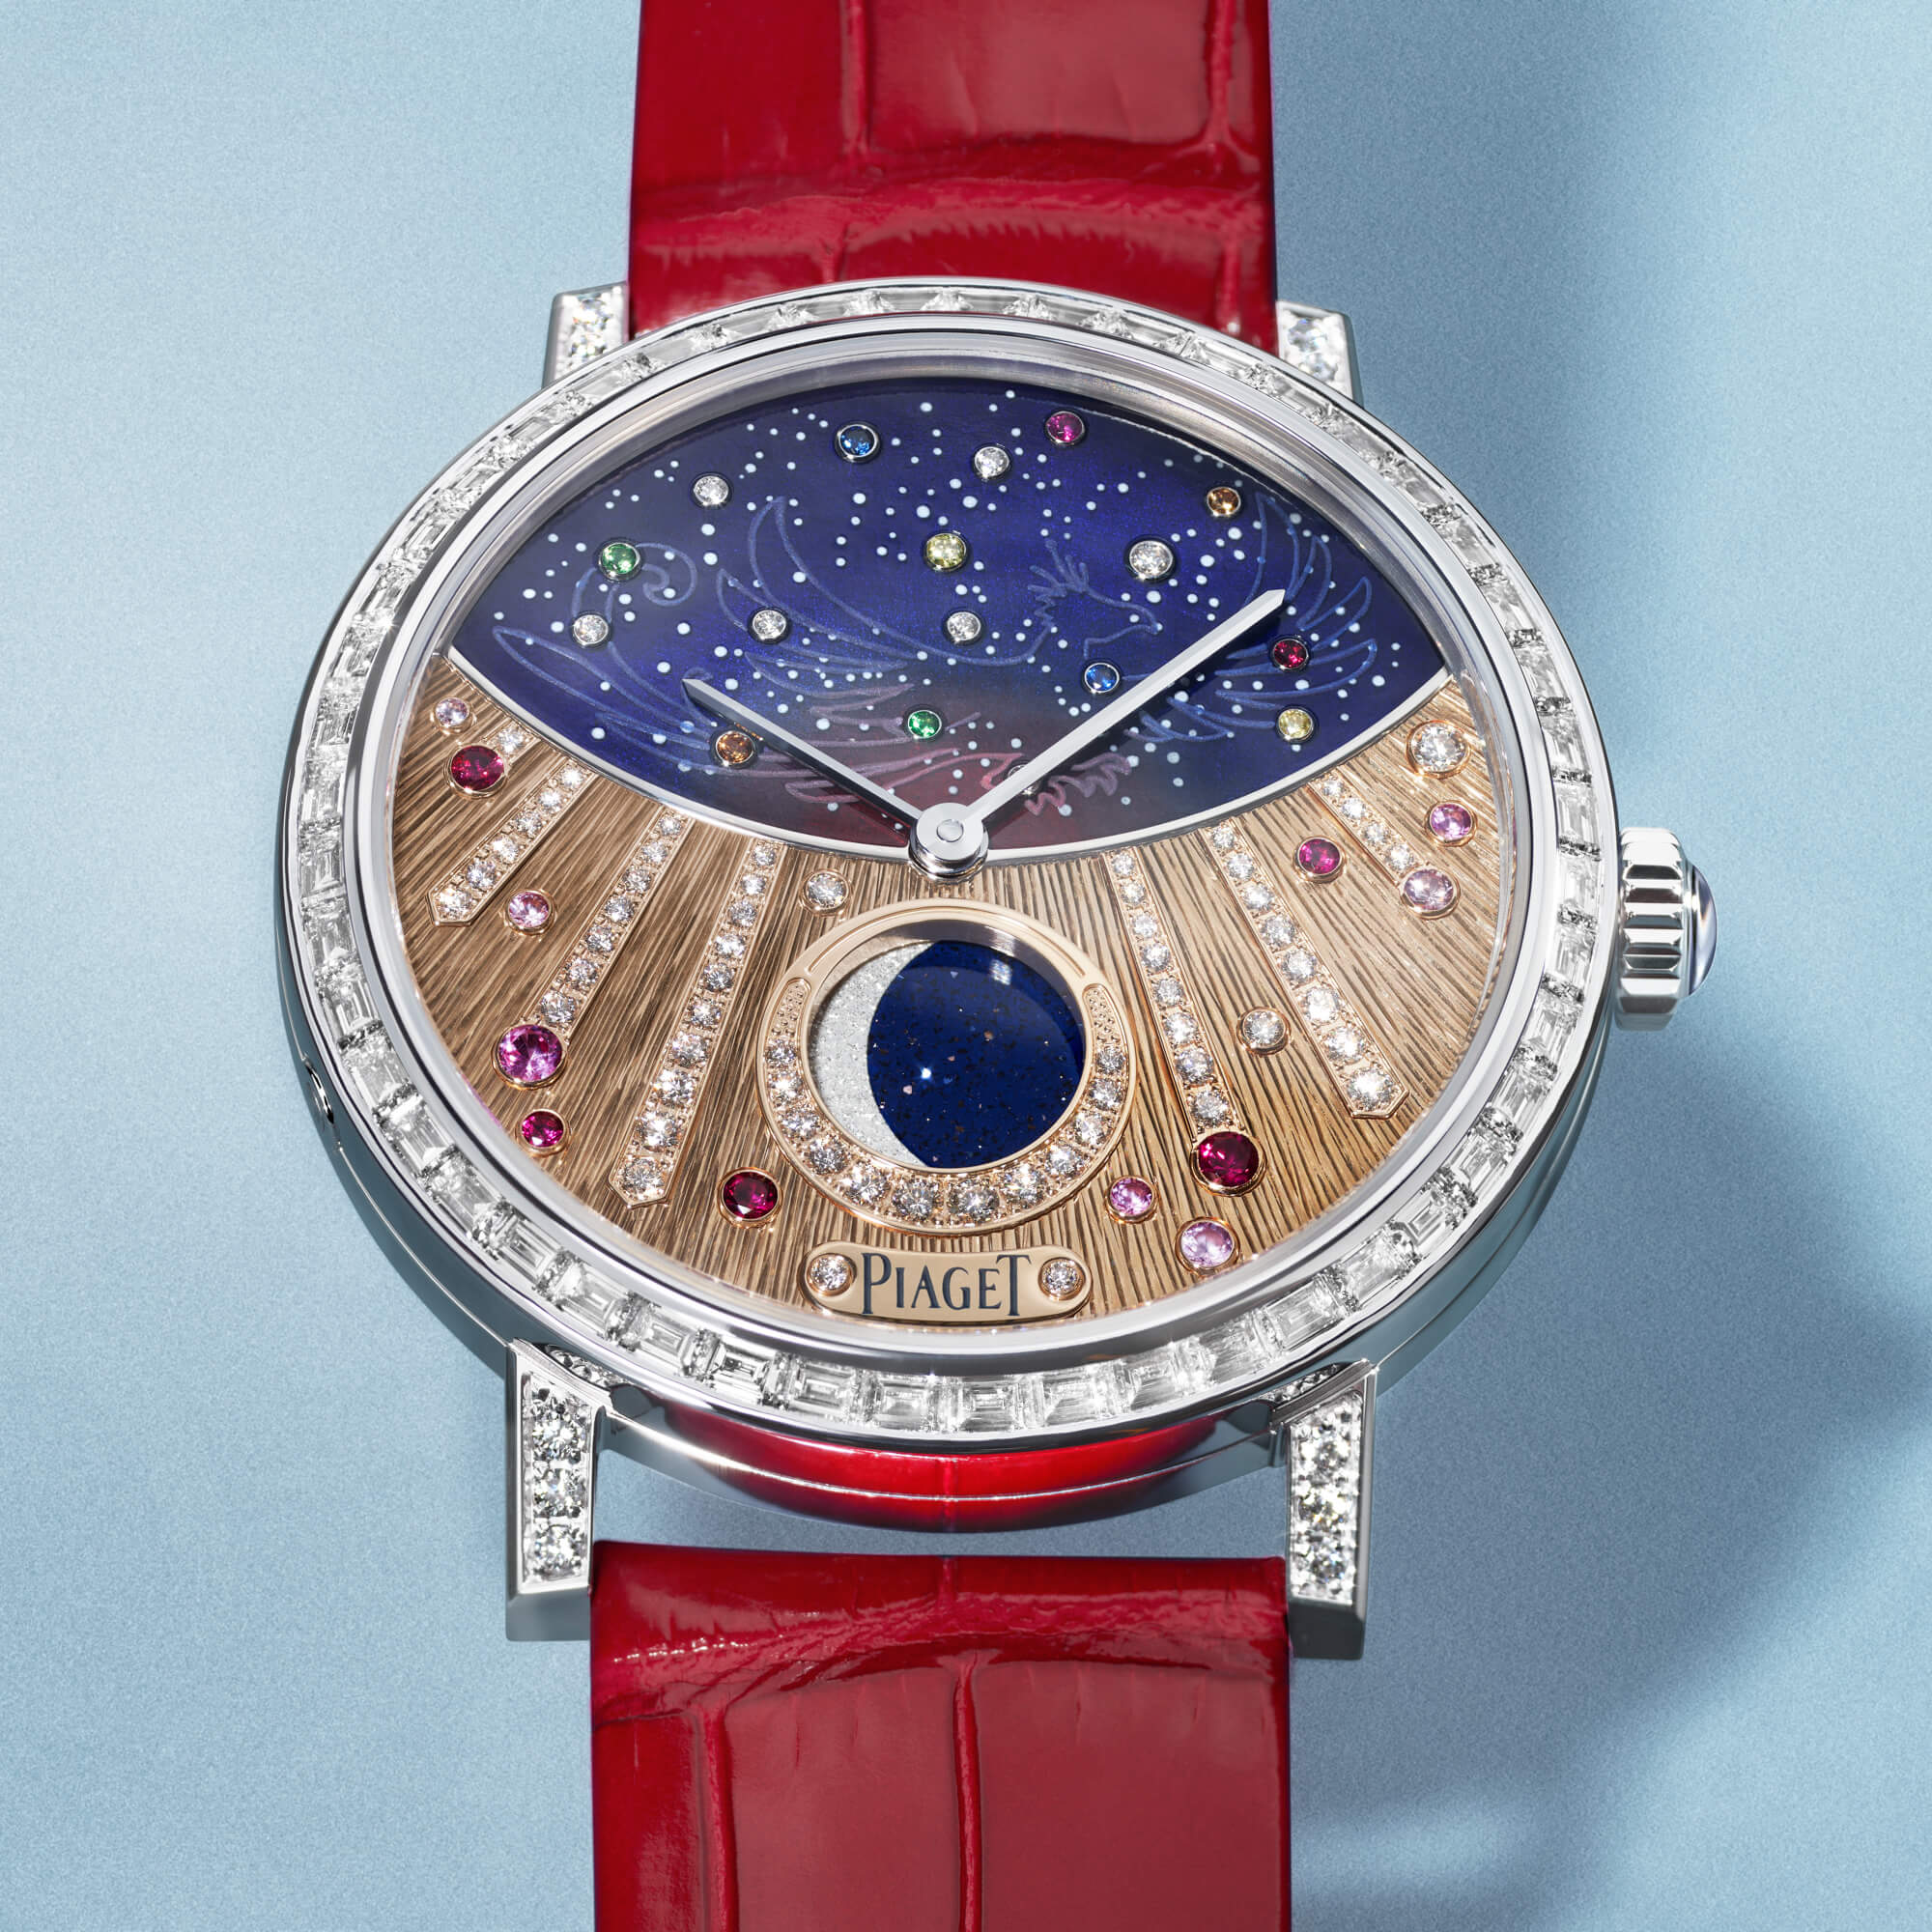 Piaget, Watches & Jewellery